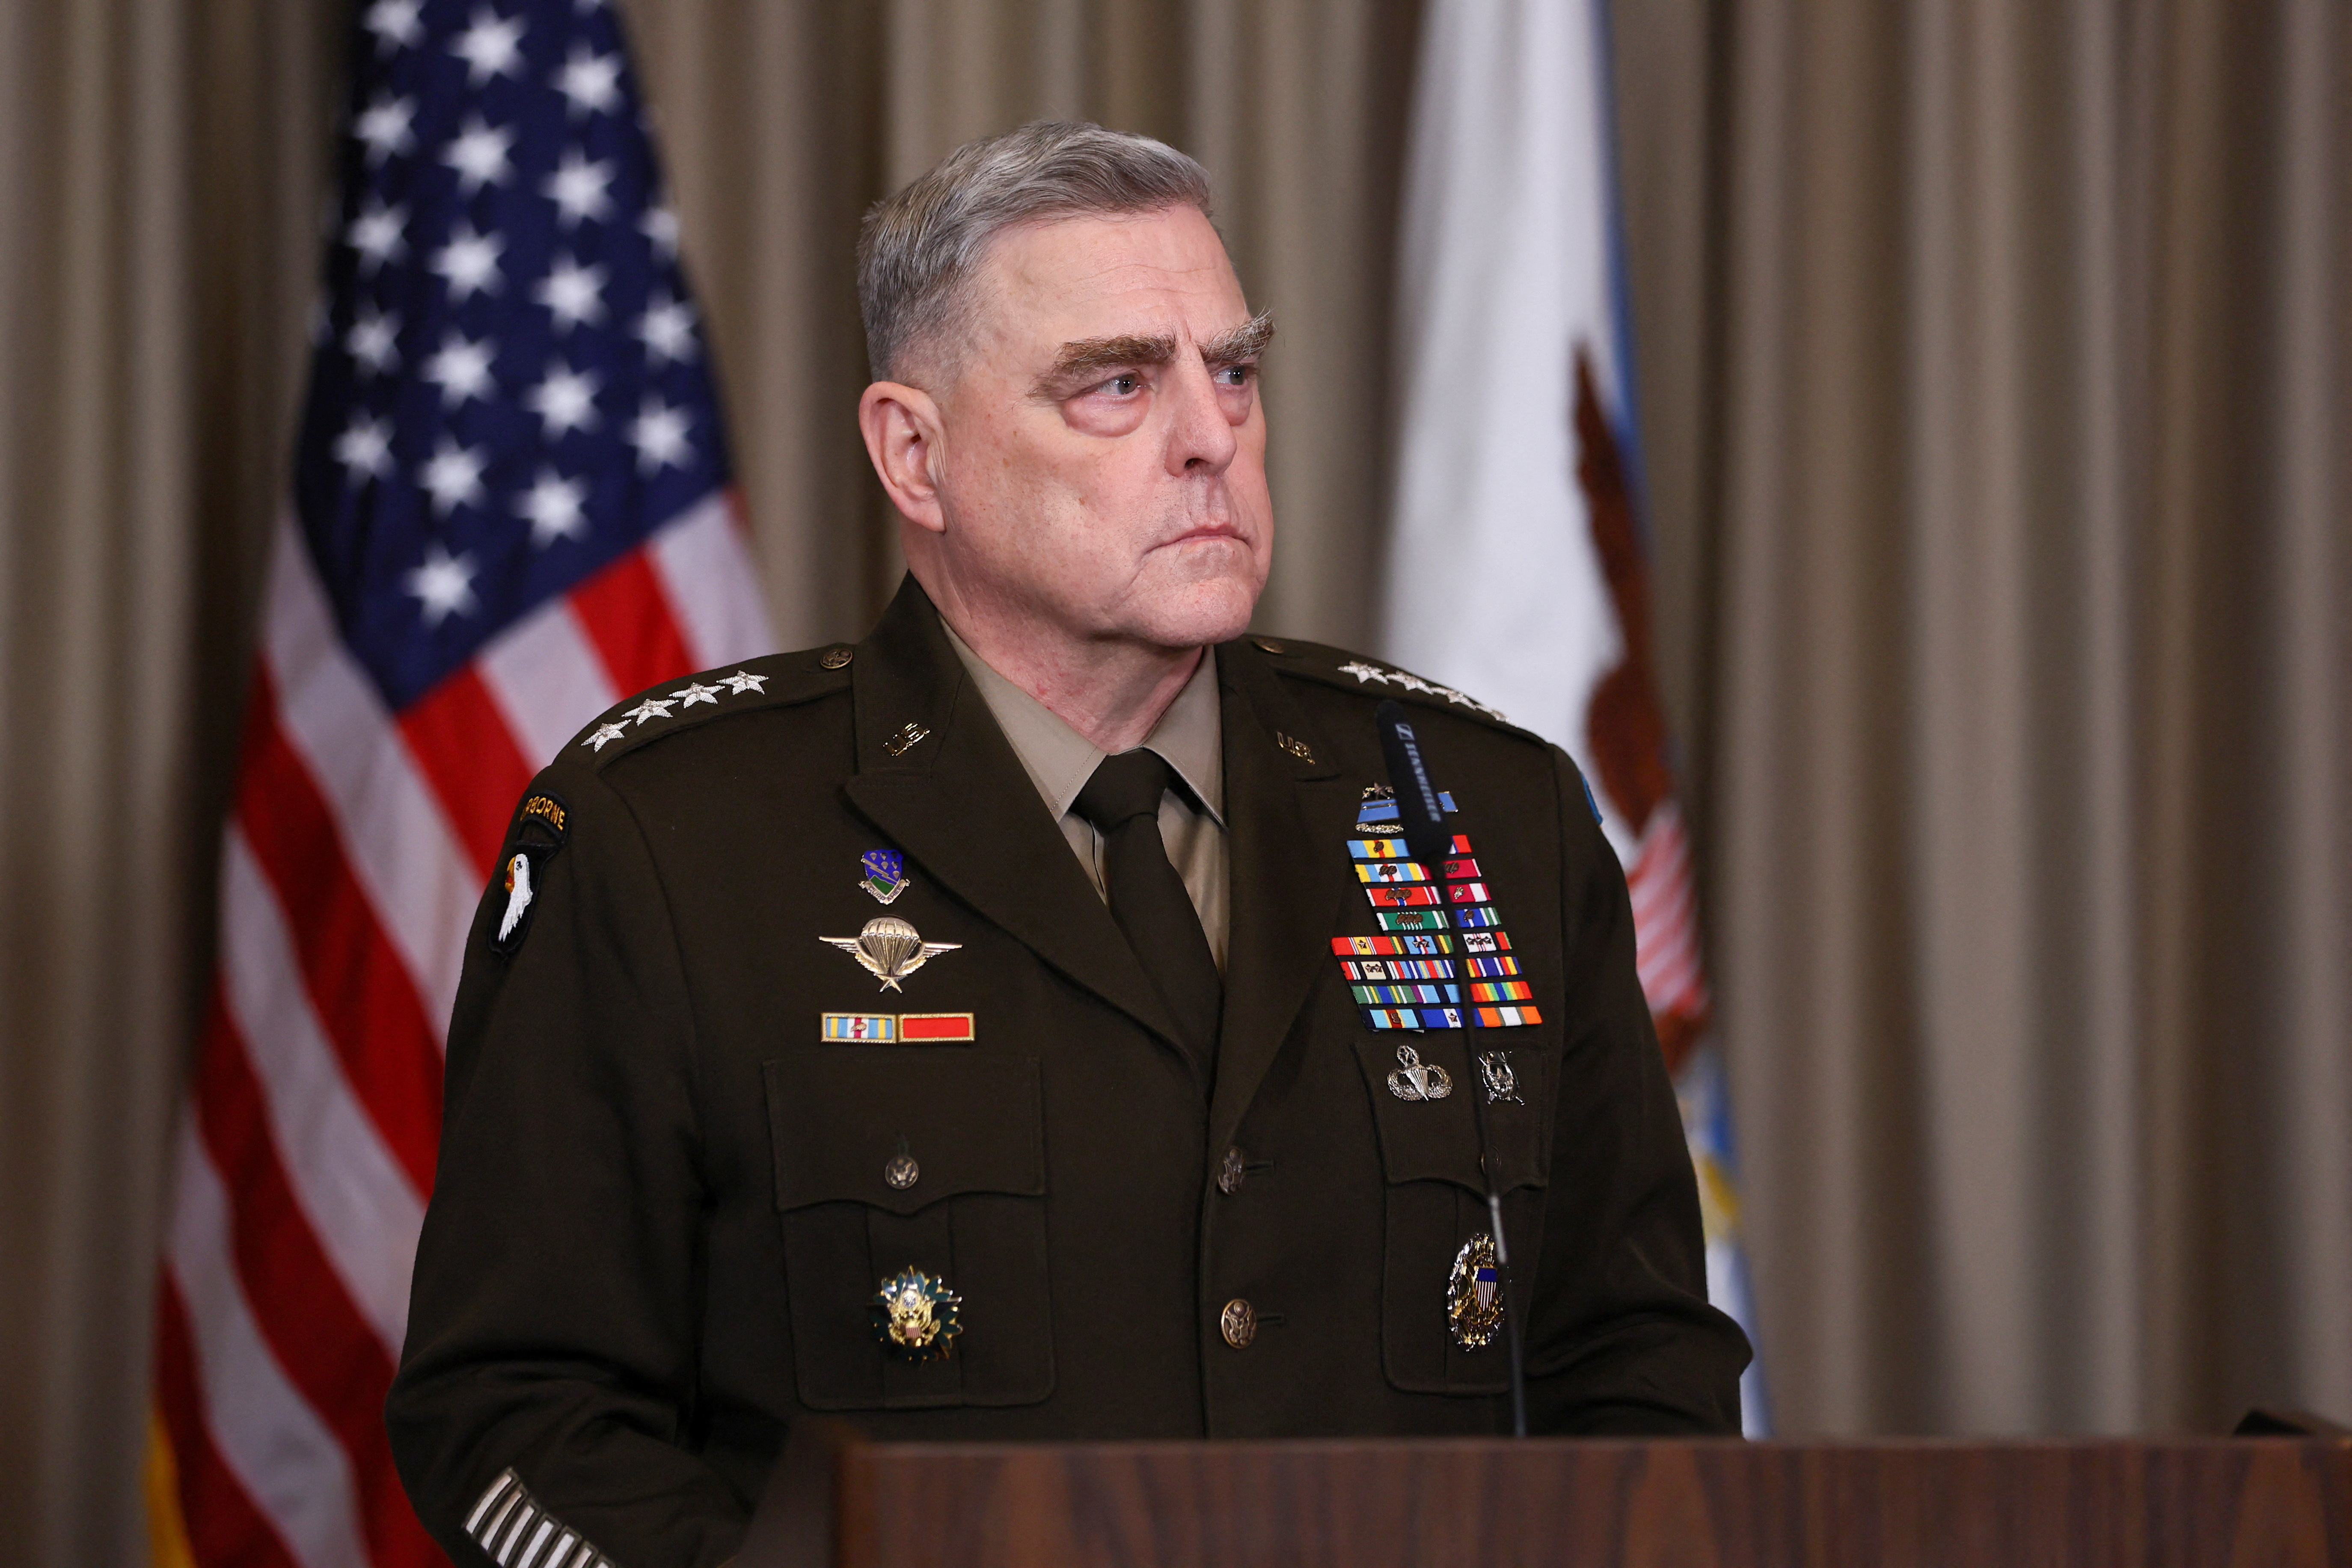 Both the head of the US Joint Chiefs of Staff, General Mark Milley, and the leader of the Northern Command, General Glen VanHerck, recommended 